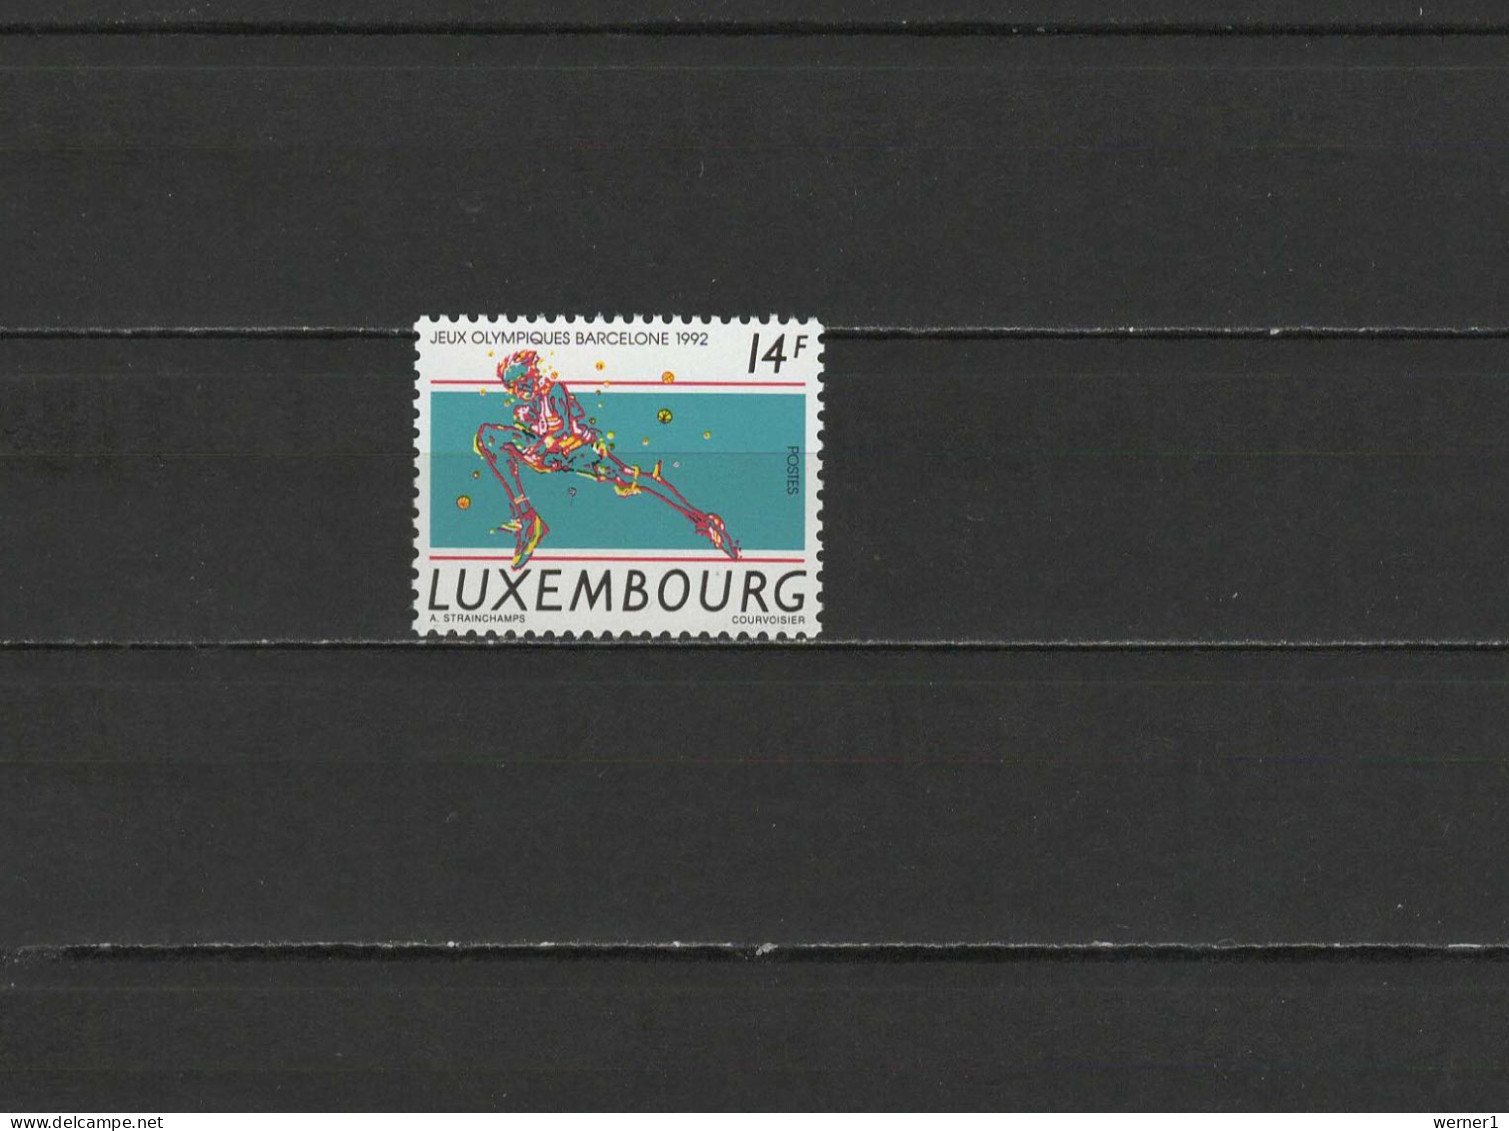 Luxemburg 1992 Olympic Games Barcelona Stamp MNH - Sommer 1992: Barcelone